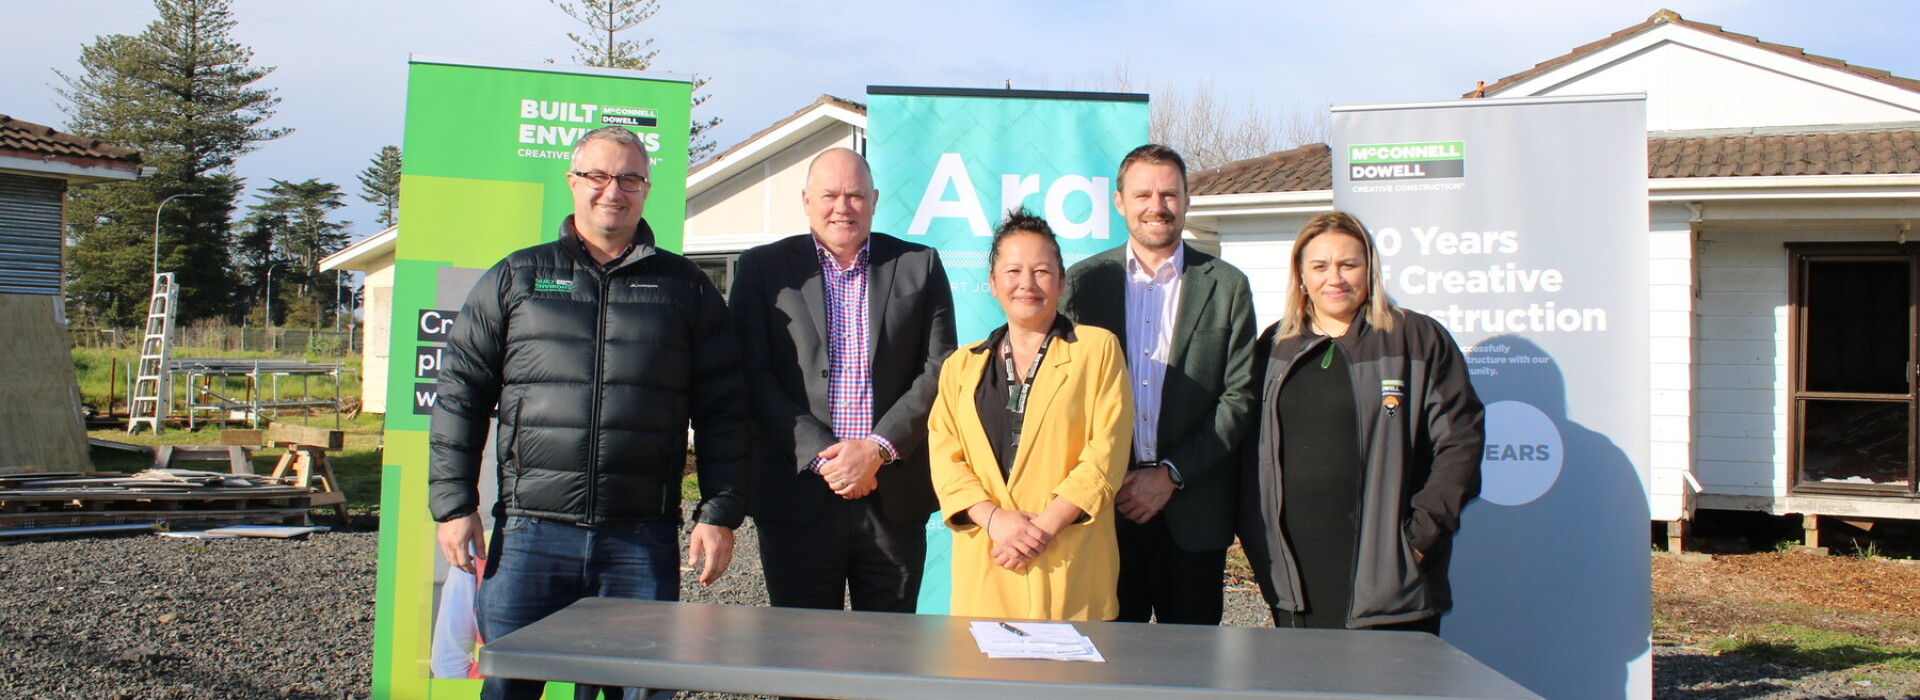 Partnership Announcement with Ara Education in South Auckland